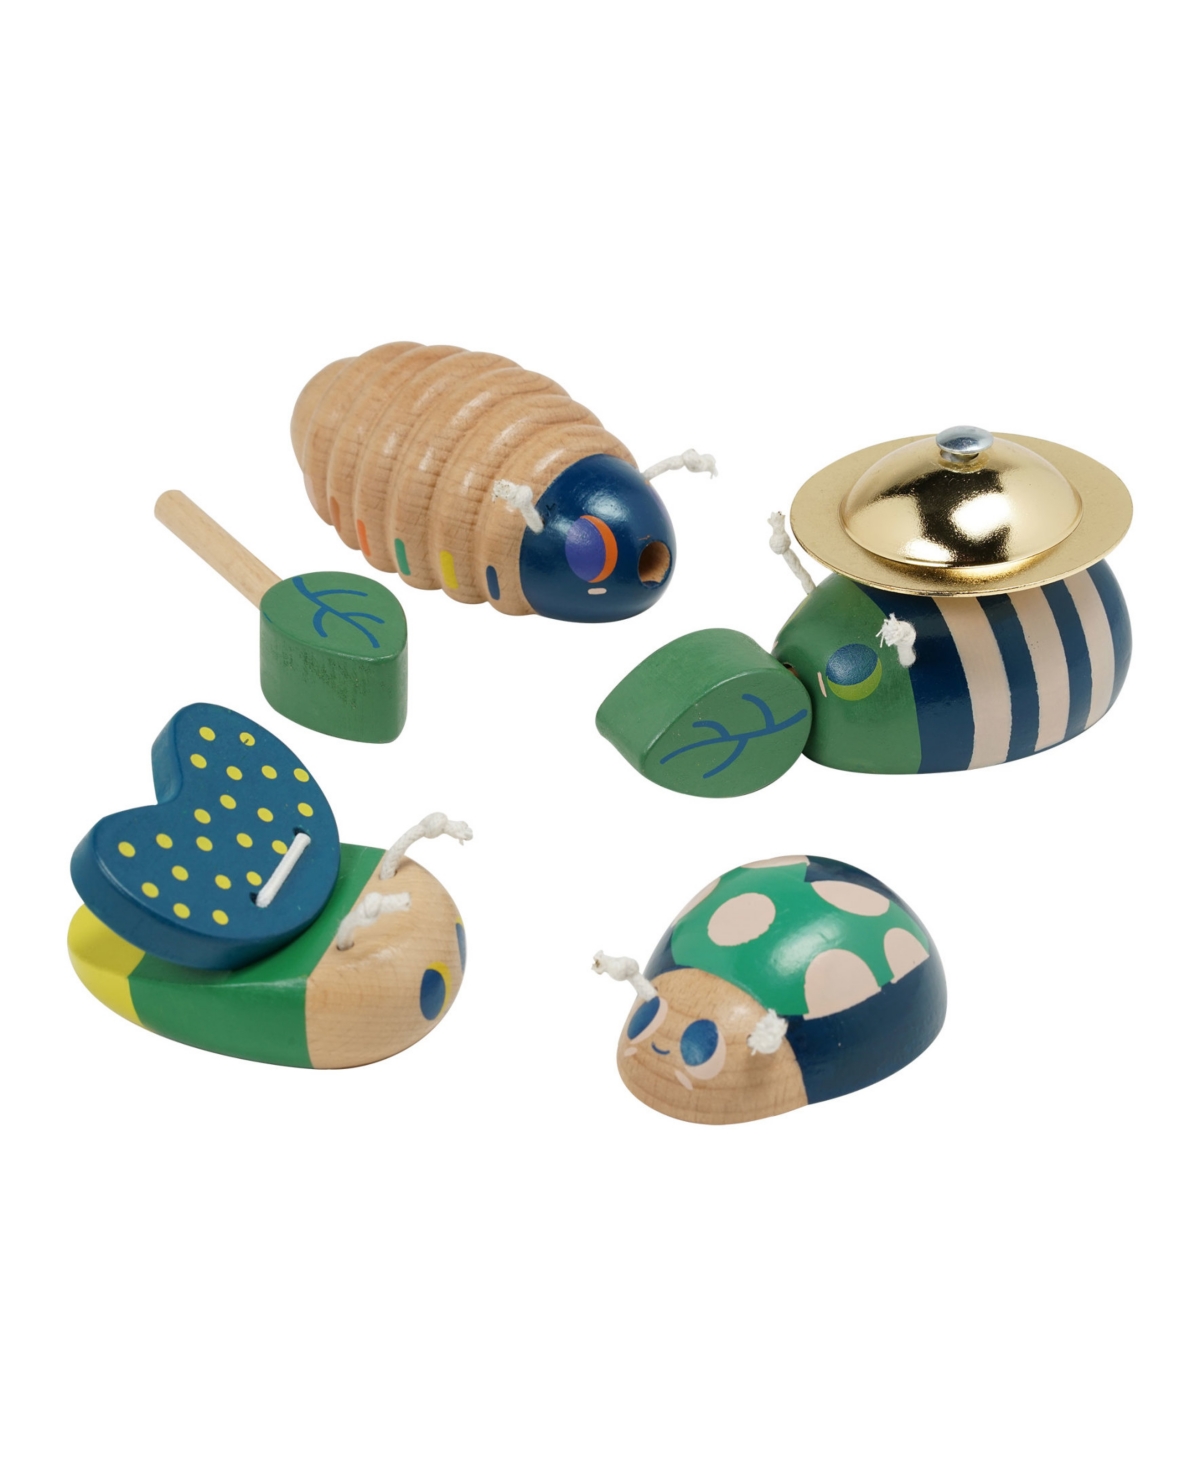 Manhattan Toy Company Folklore Bug Quartet Musical Wooden Toy Set, 4 Piece In Multicolor